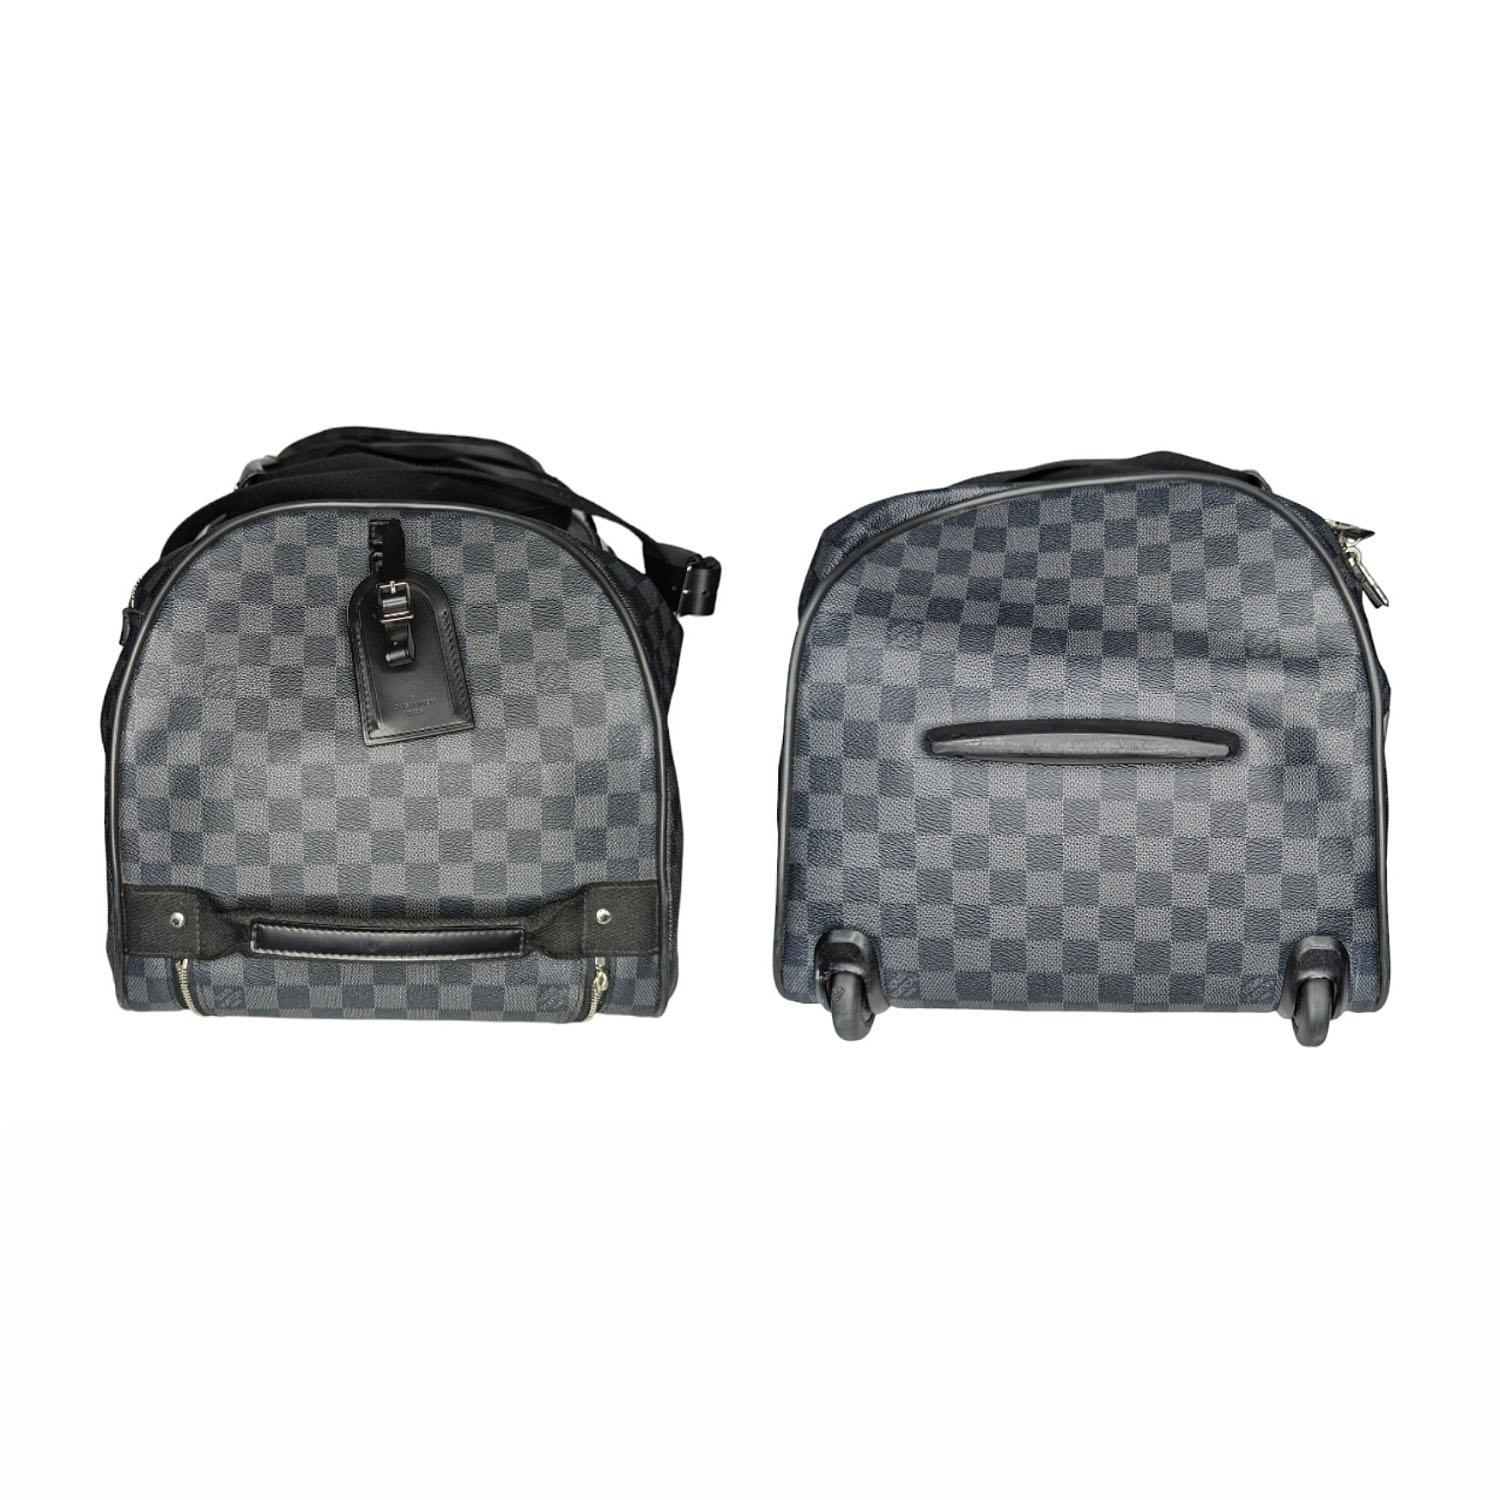 Louis Vuitton Damier Graphite Neo Eole 65 Rolling Duffle In Good Condition For Sale In Scottsdale, AZ